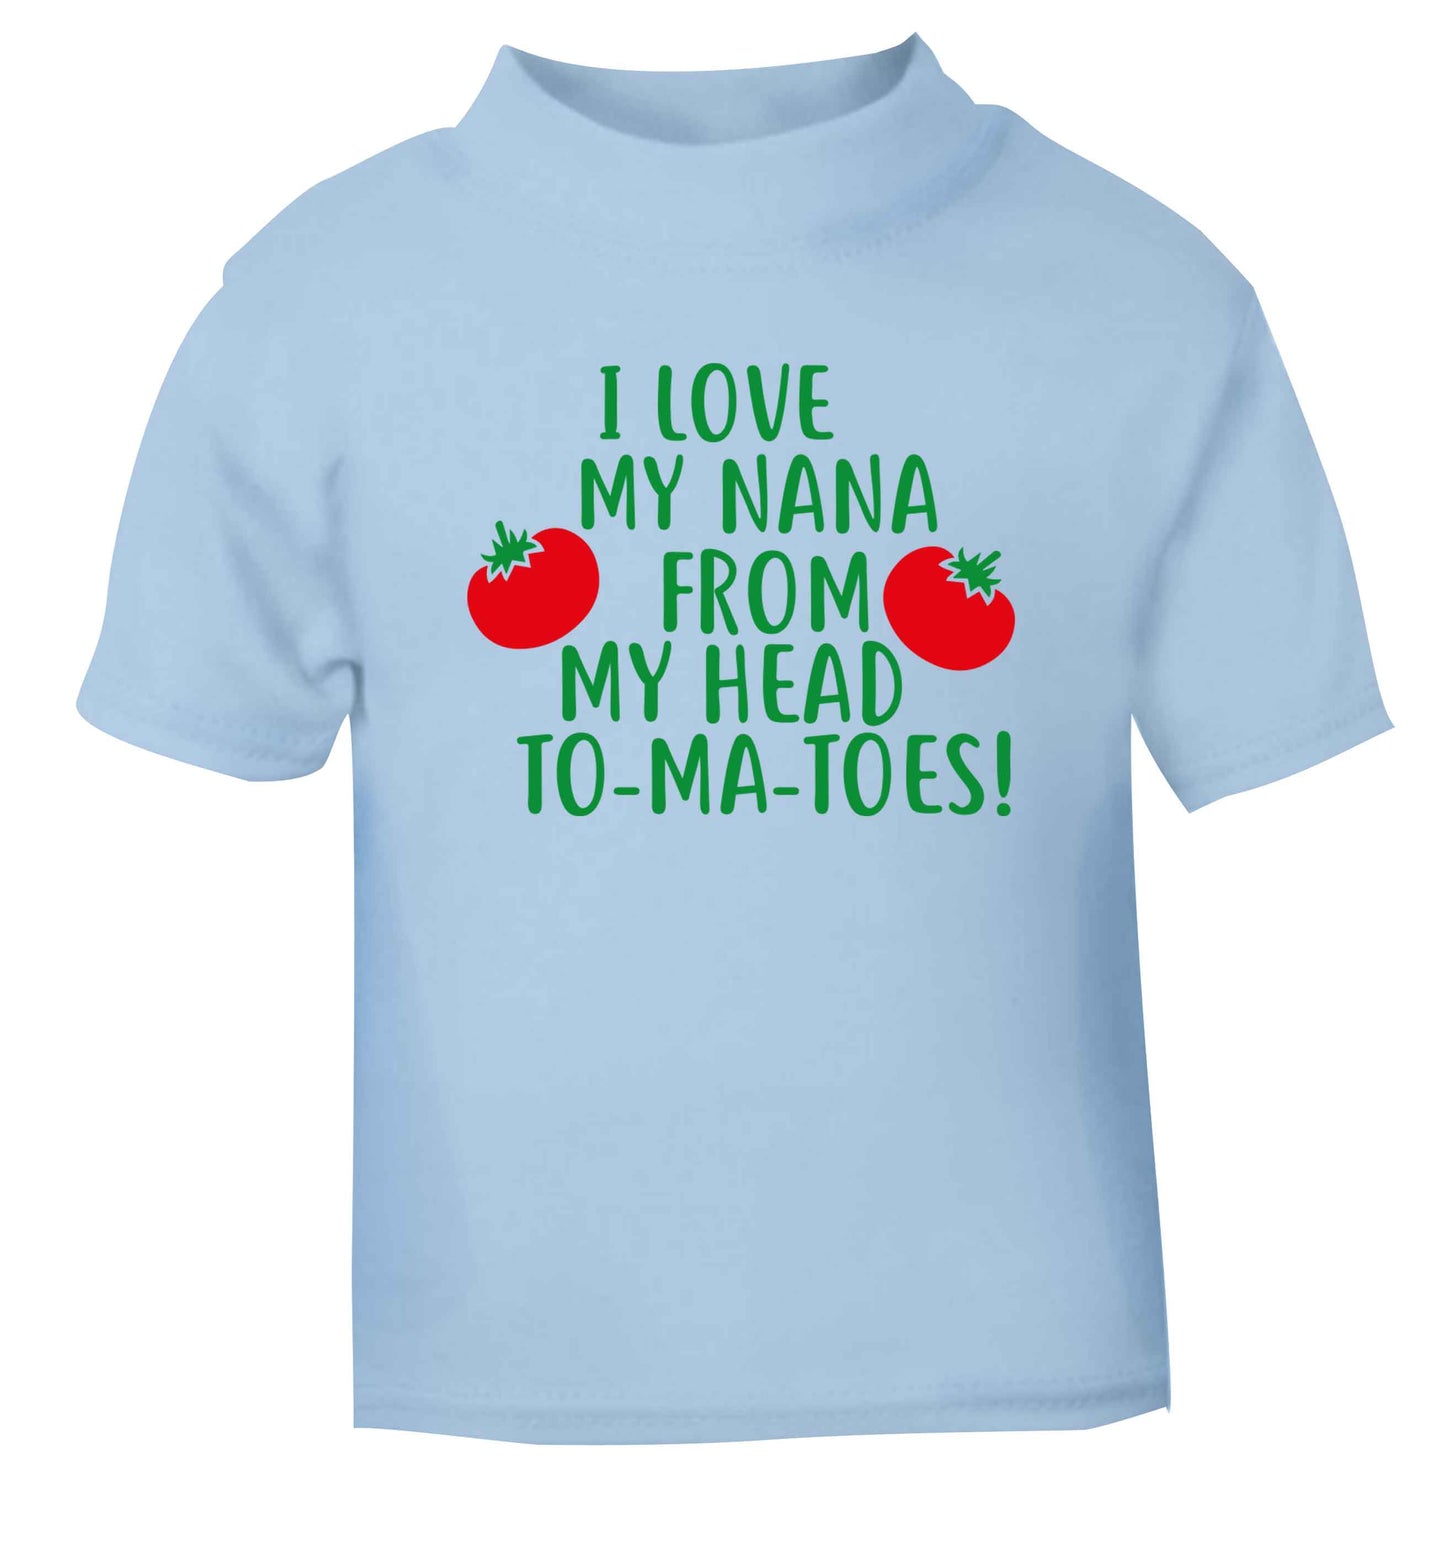 I love my nana from my head to-ma-toes light blue Baby Toddler Tshirt 2 Years